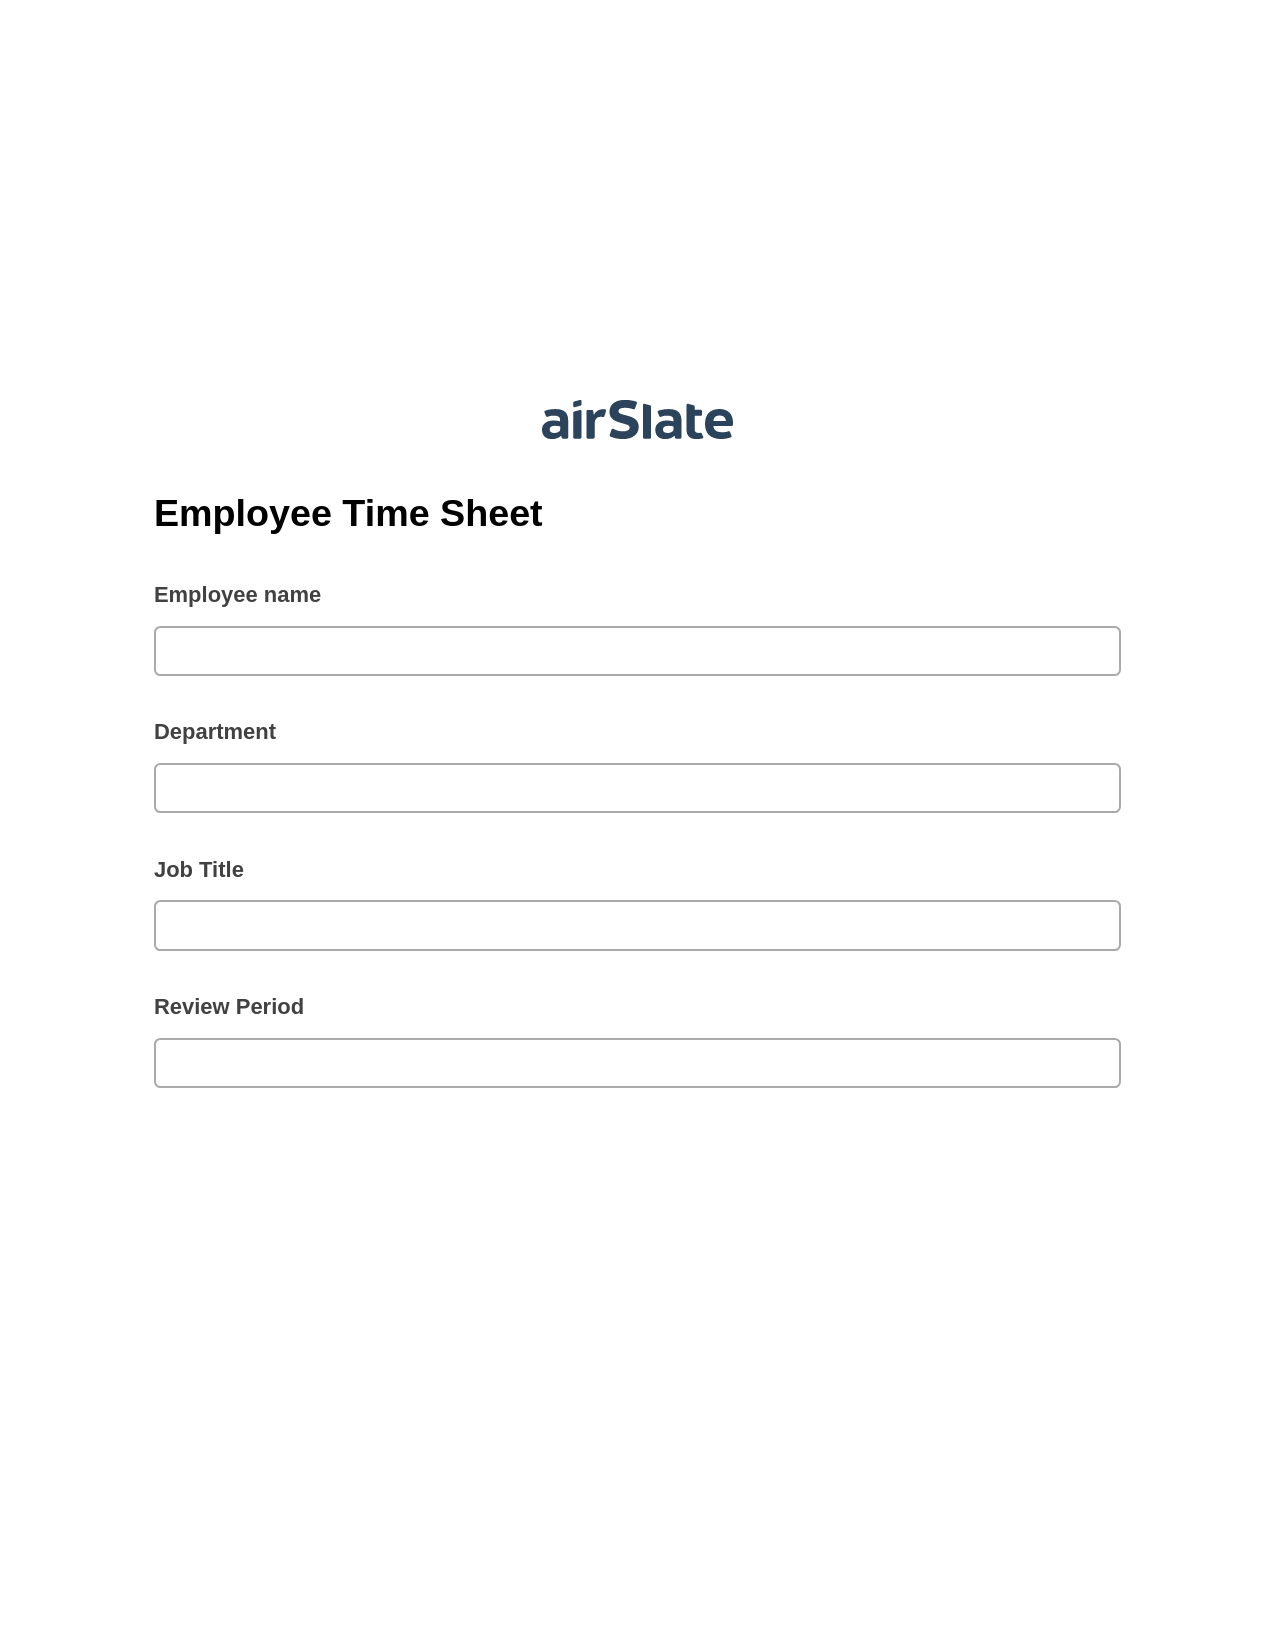 Employee Time Sheet Pre-fill from Salesforce Records Bot, Create slate addon, Archive to Box Bot